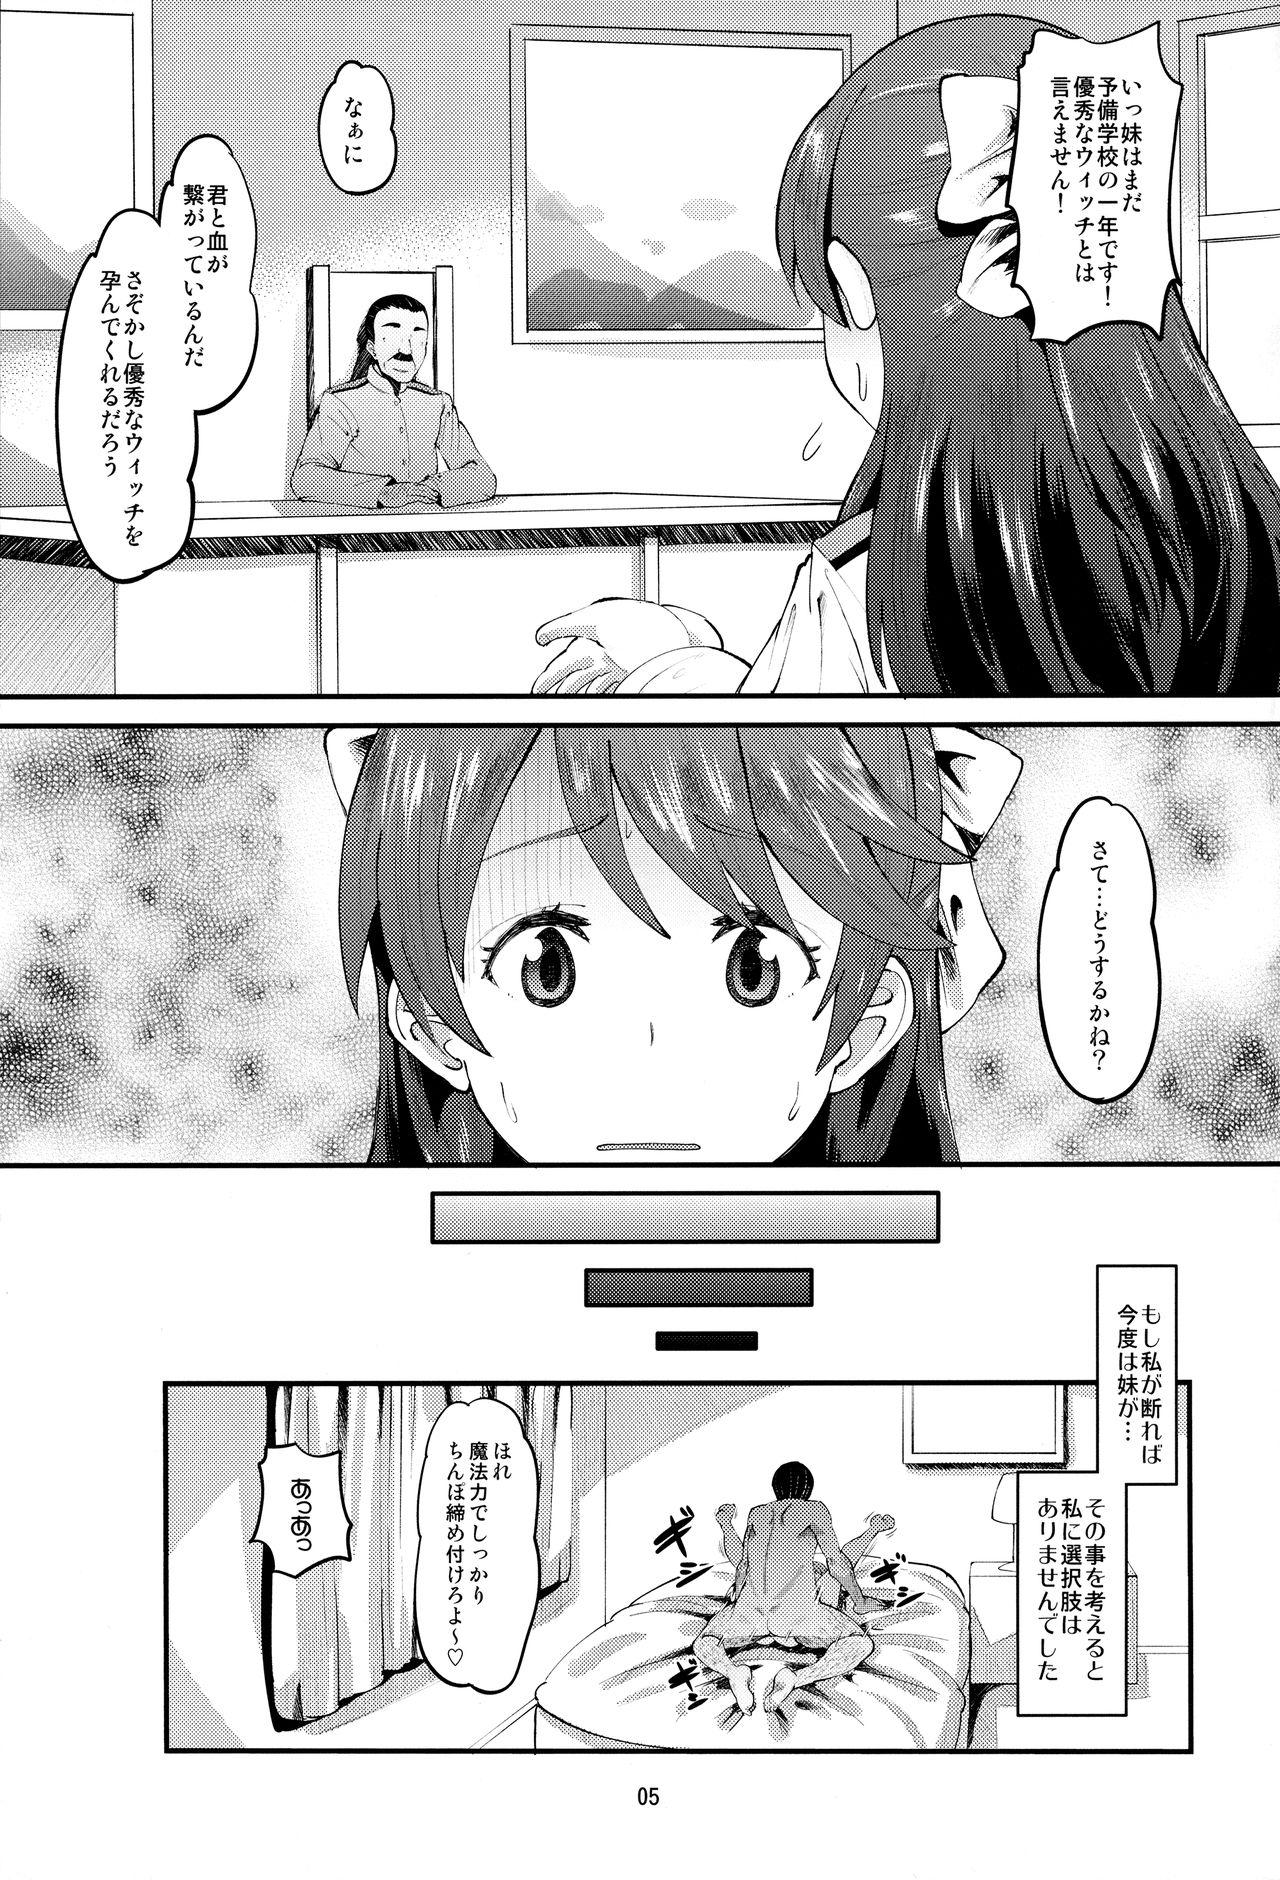 Gayemo 502 Haramase Butai - Strike witches Brave witches Gay Friend - Page 4